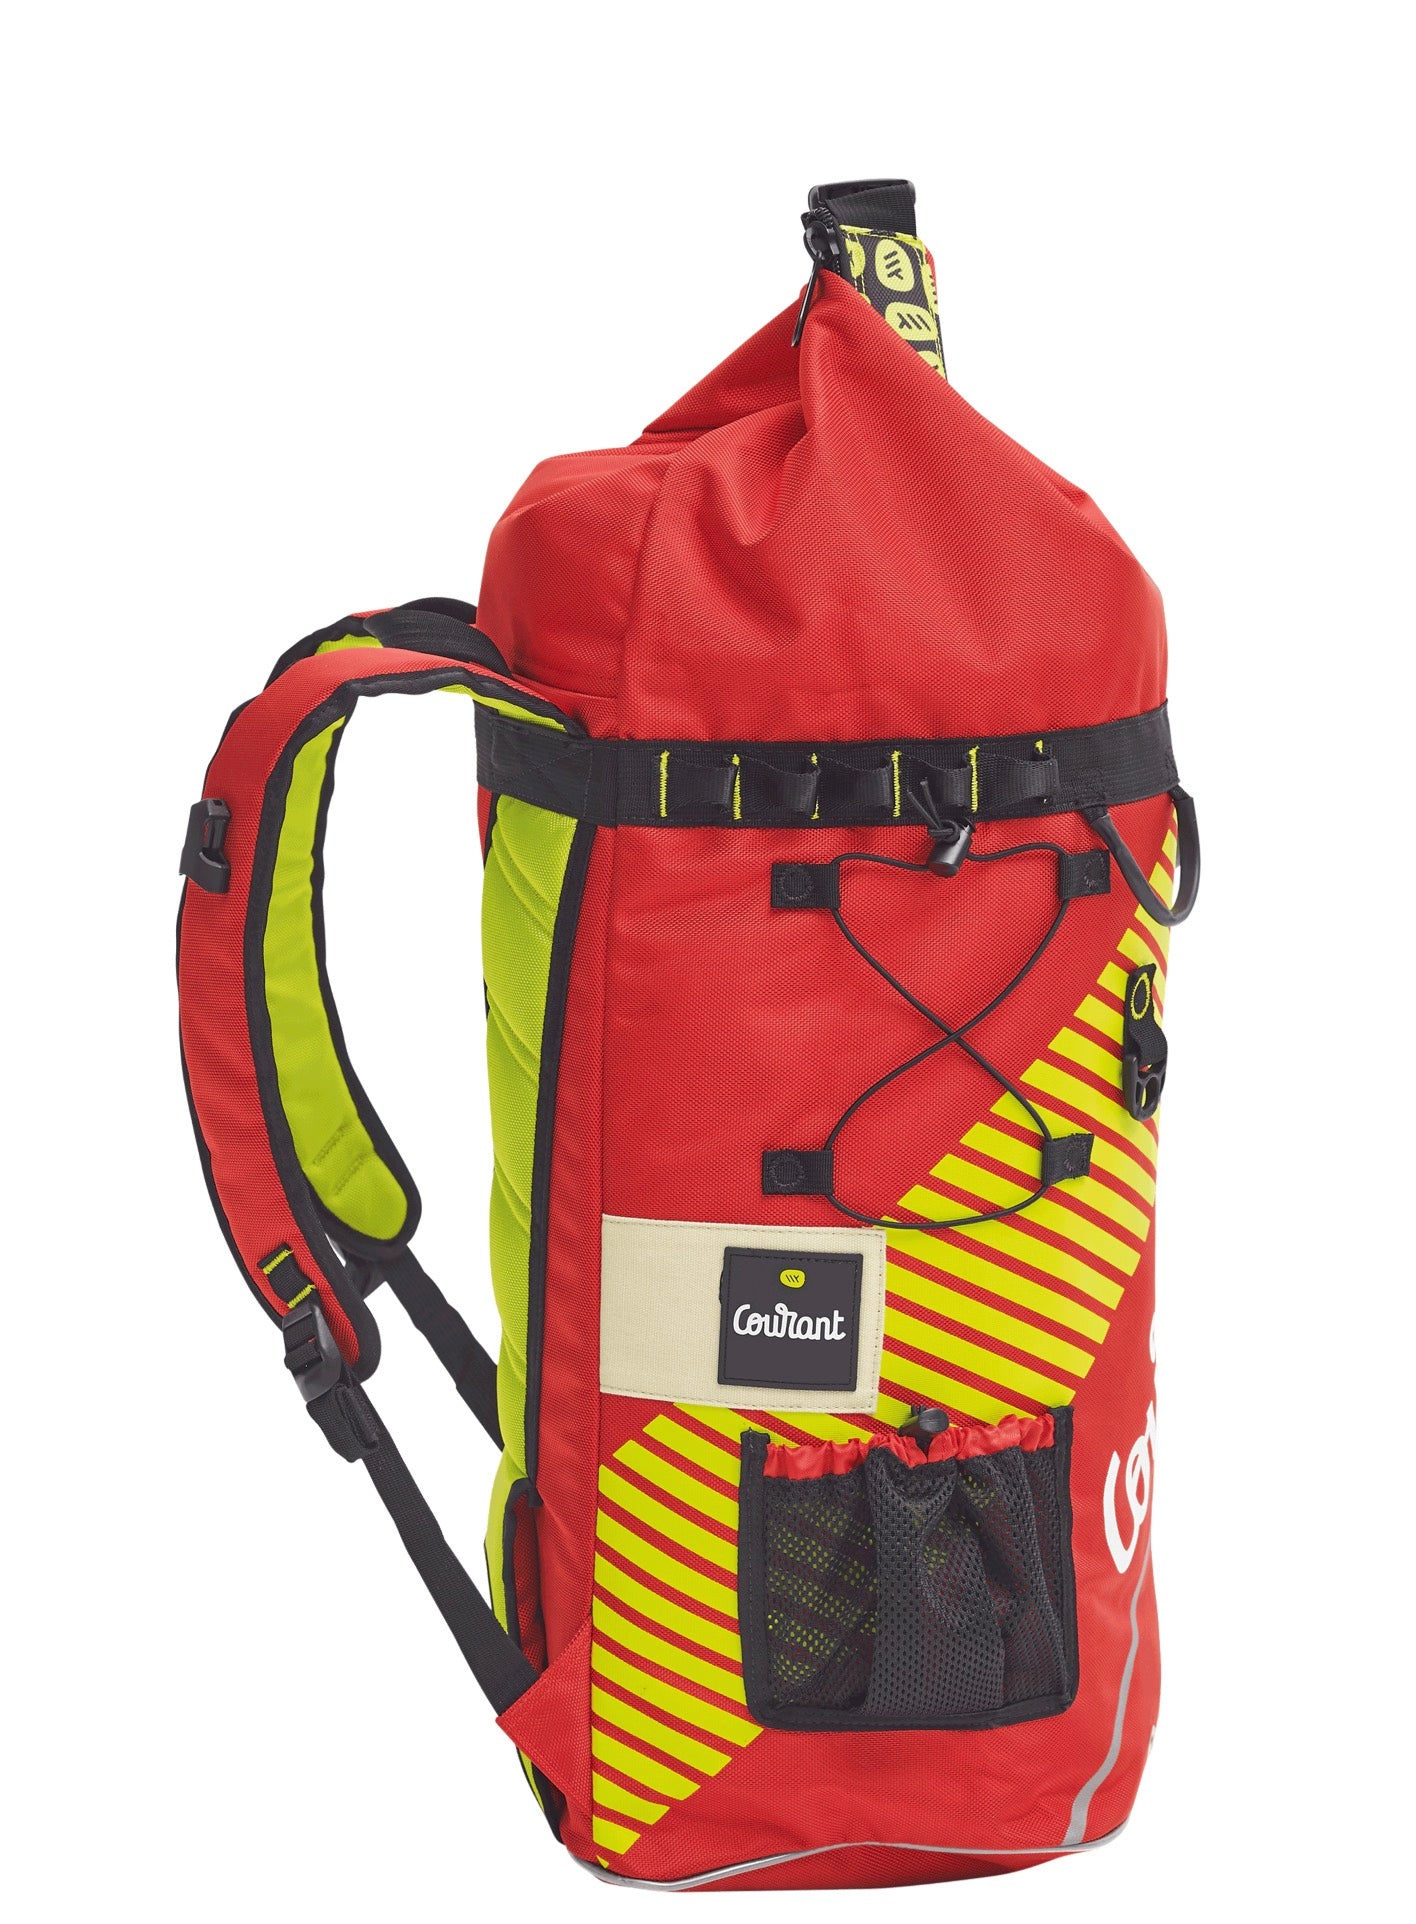 COURANT DOCK RESCUE RED - 60 L - 0